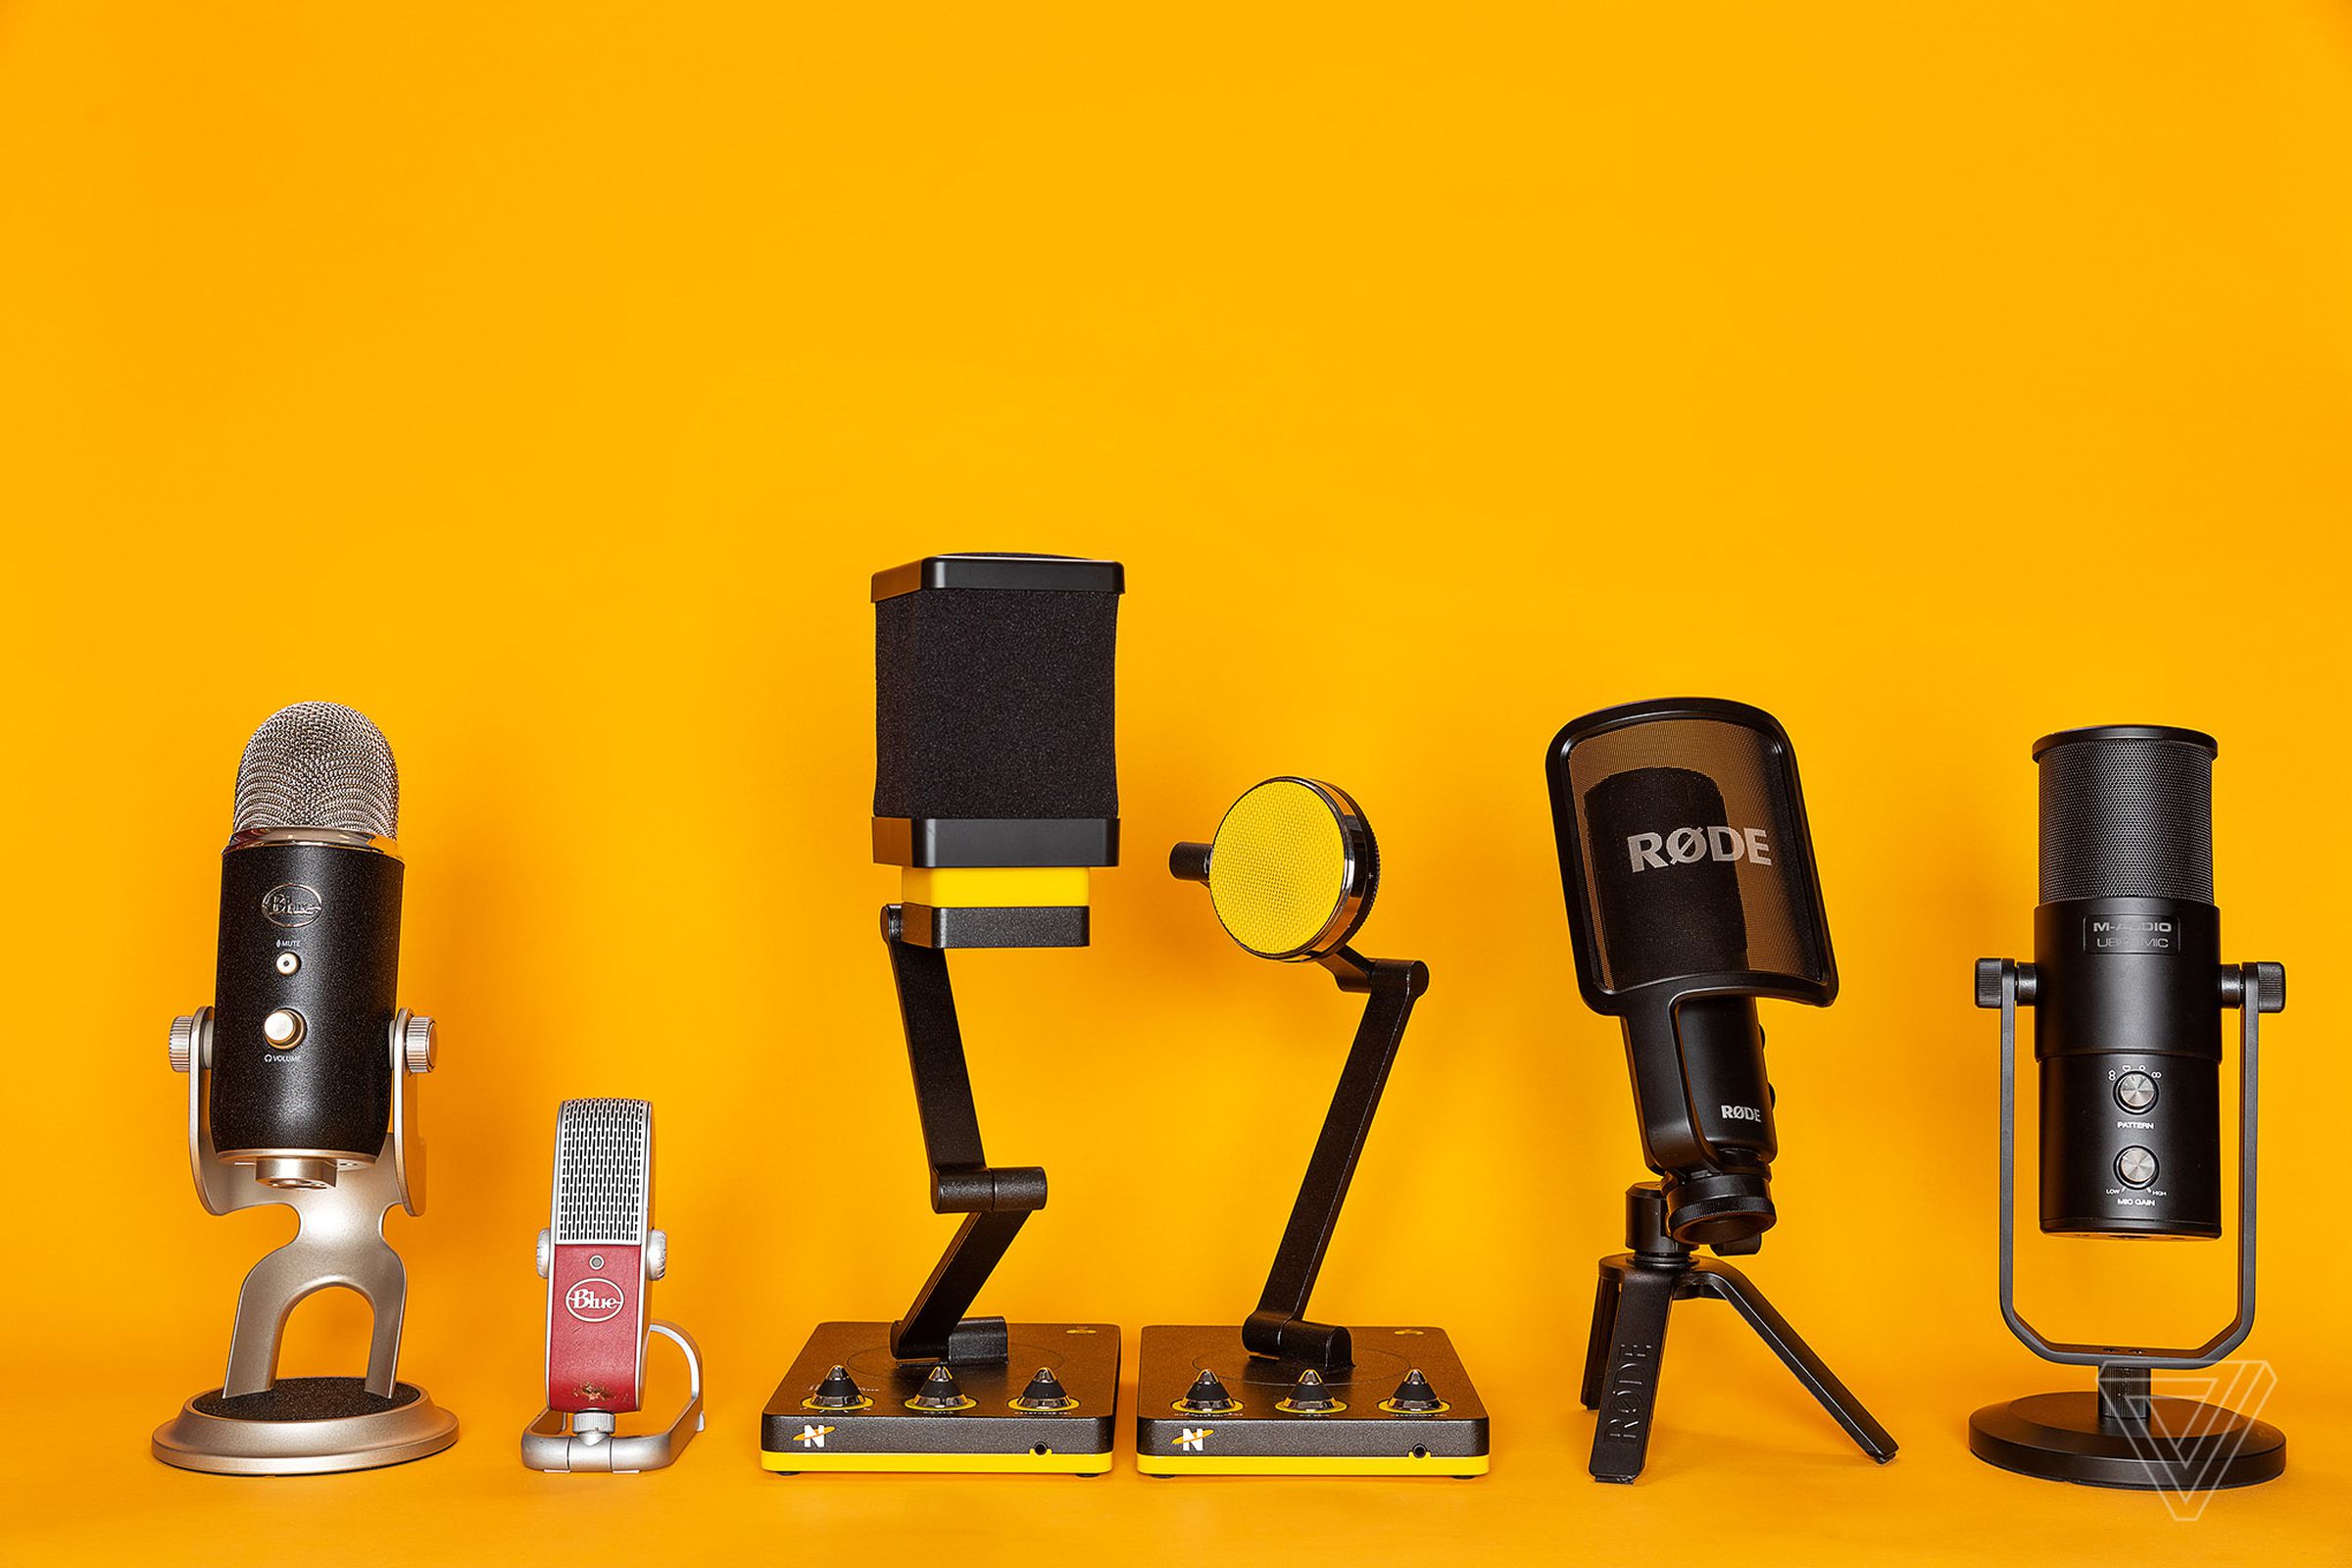 There is a wide range of microphones available for podcasters.